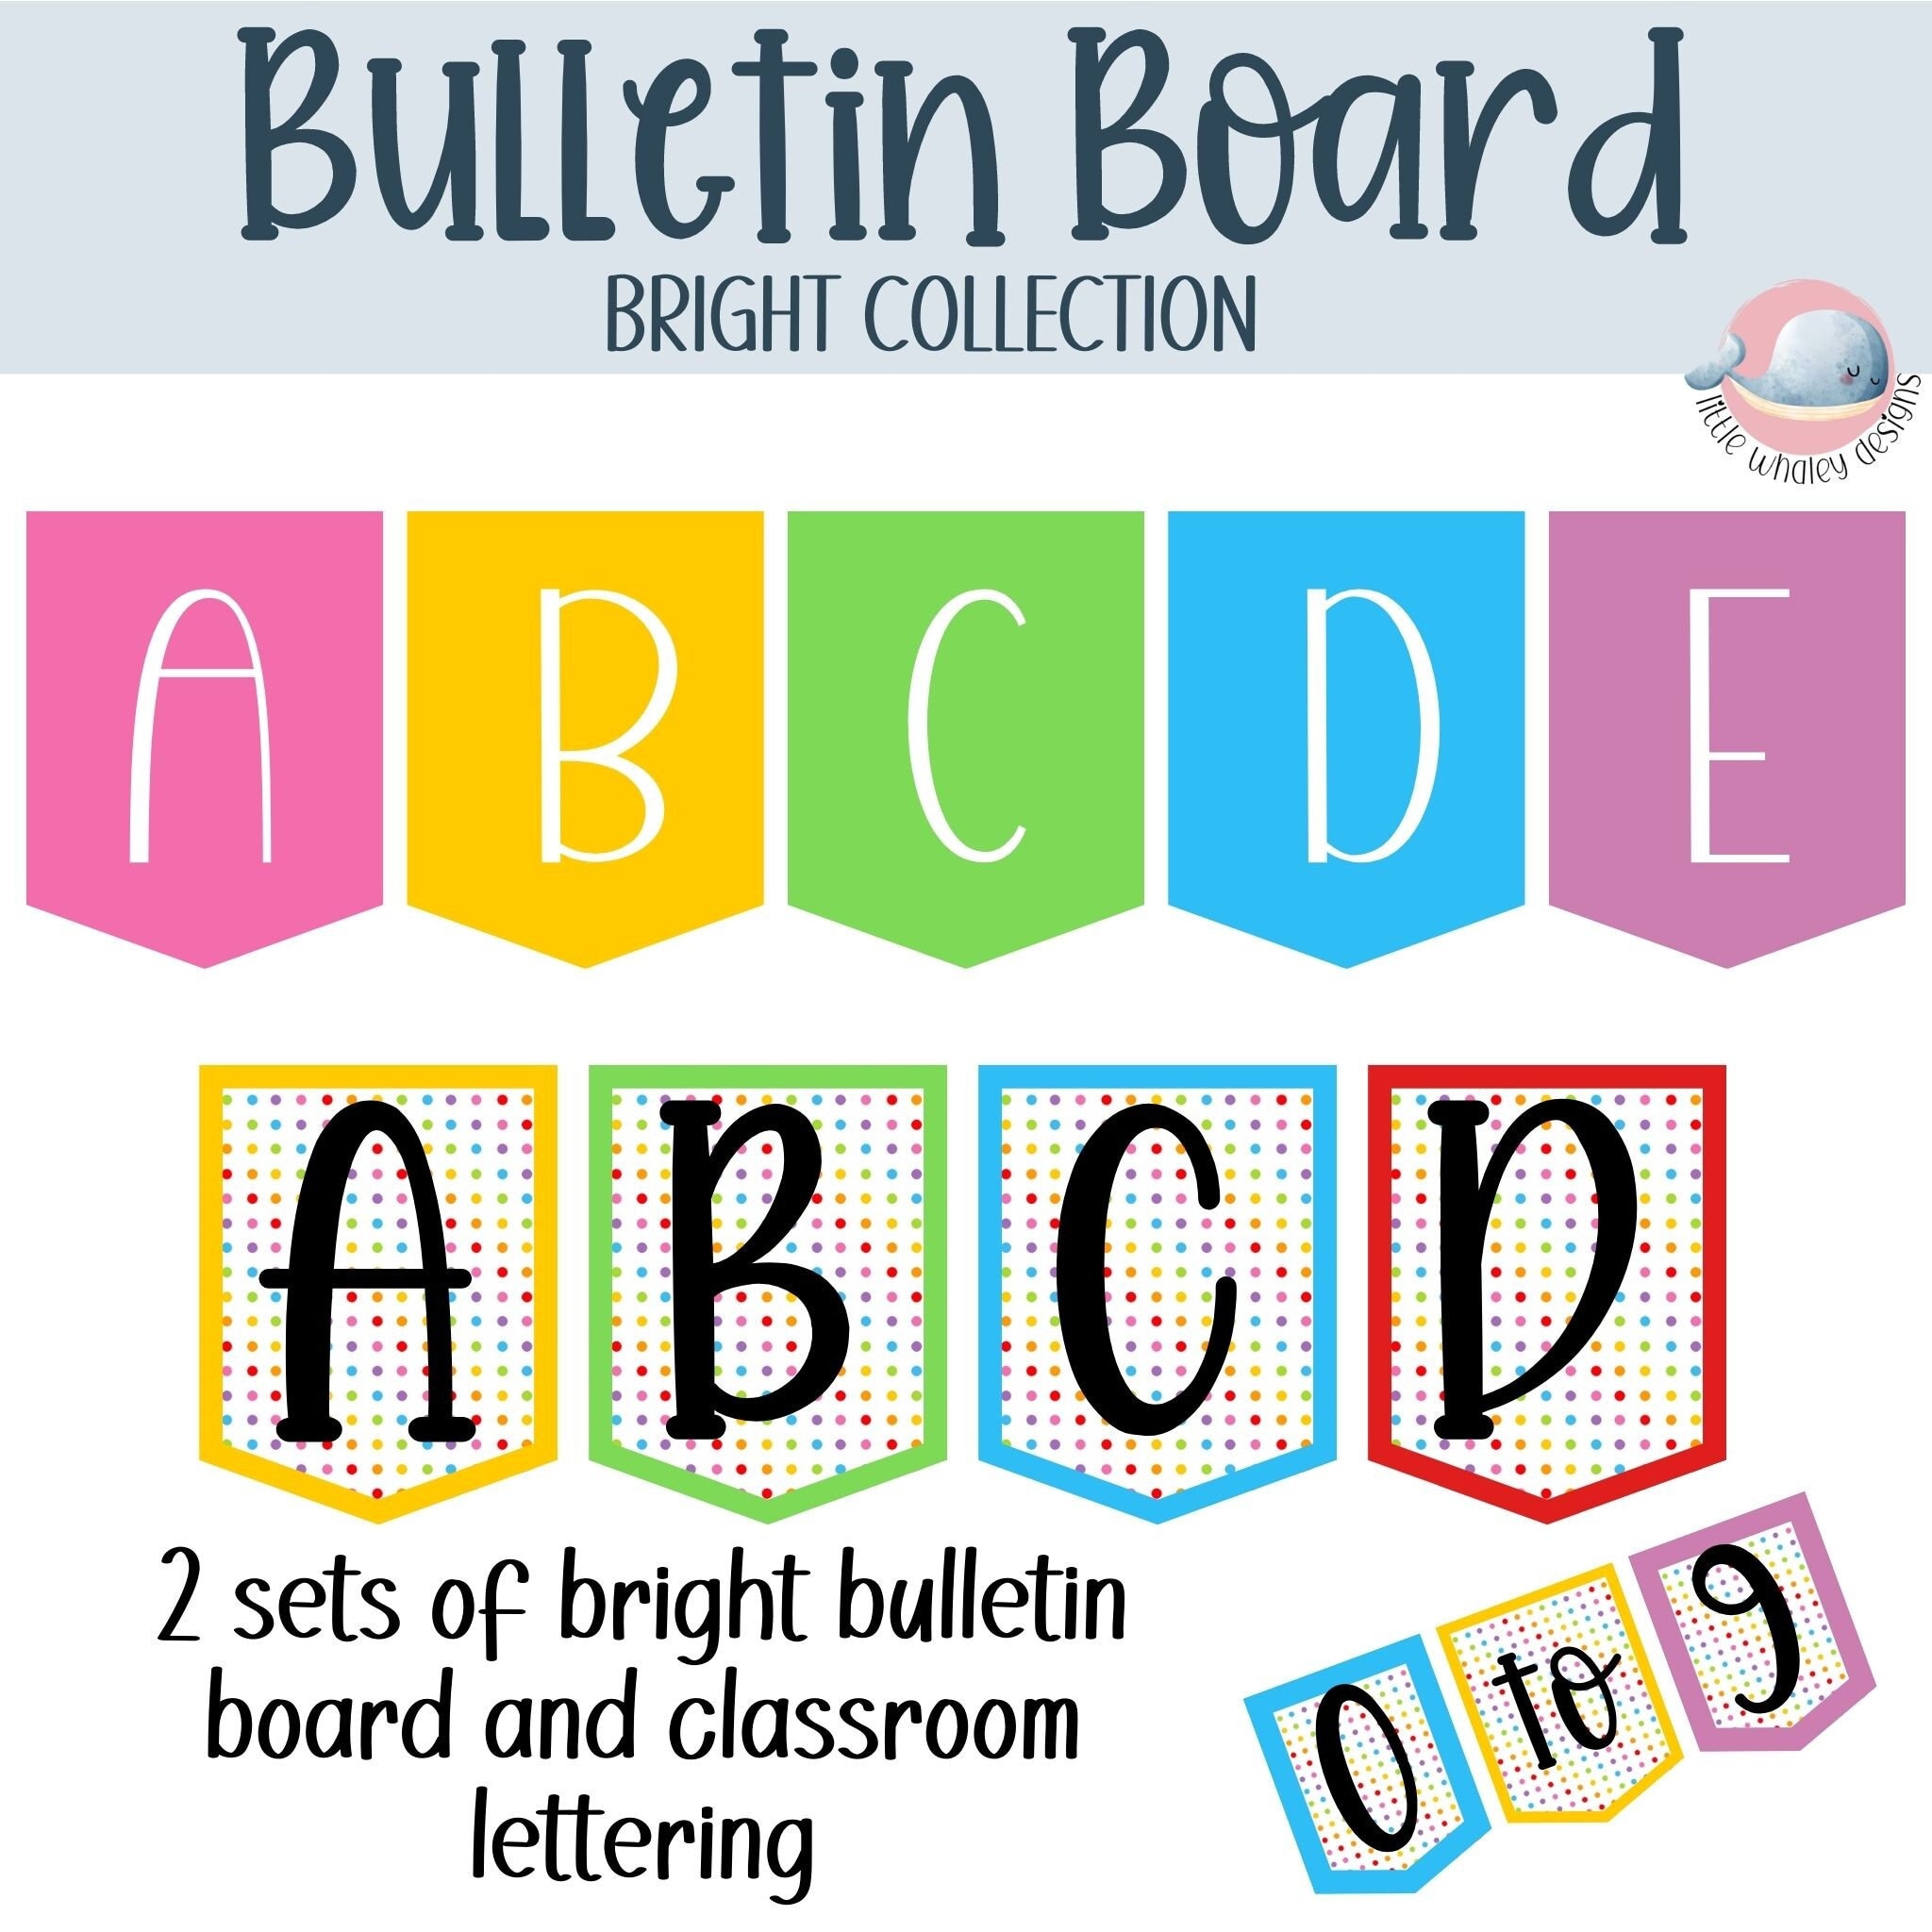 3D Printable Bulletin Board Letters Classroom Decor Bulletin Board Ideas  Classroom Decorations Printable Classroom Decor 